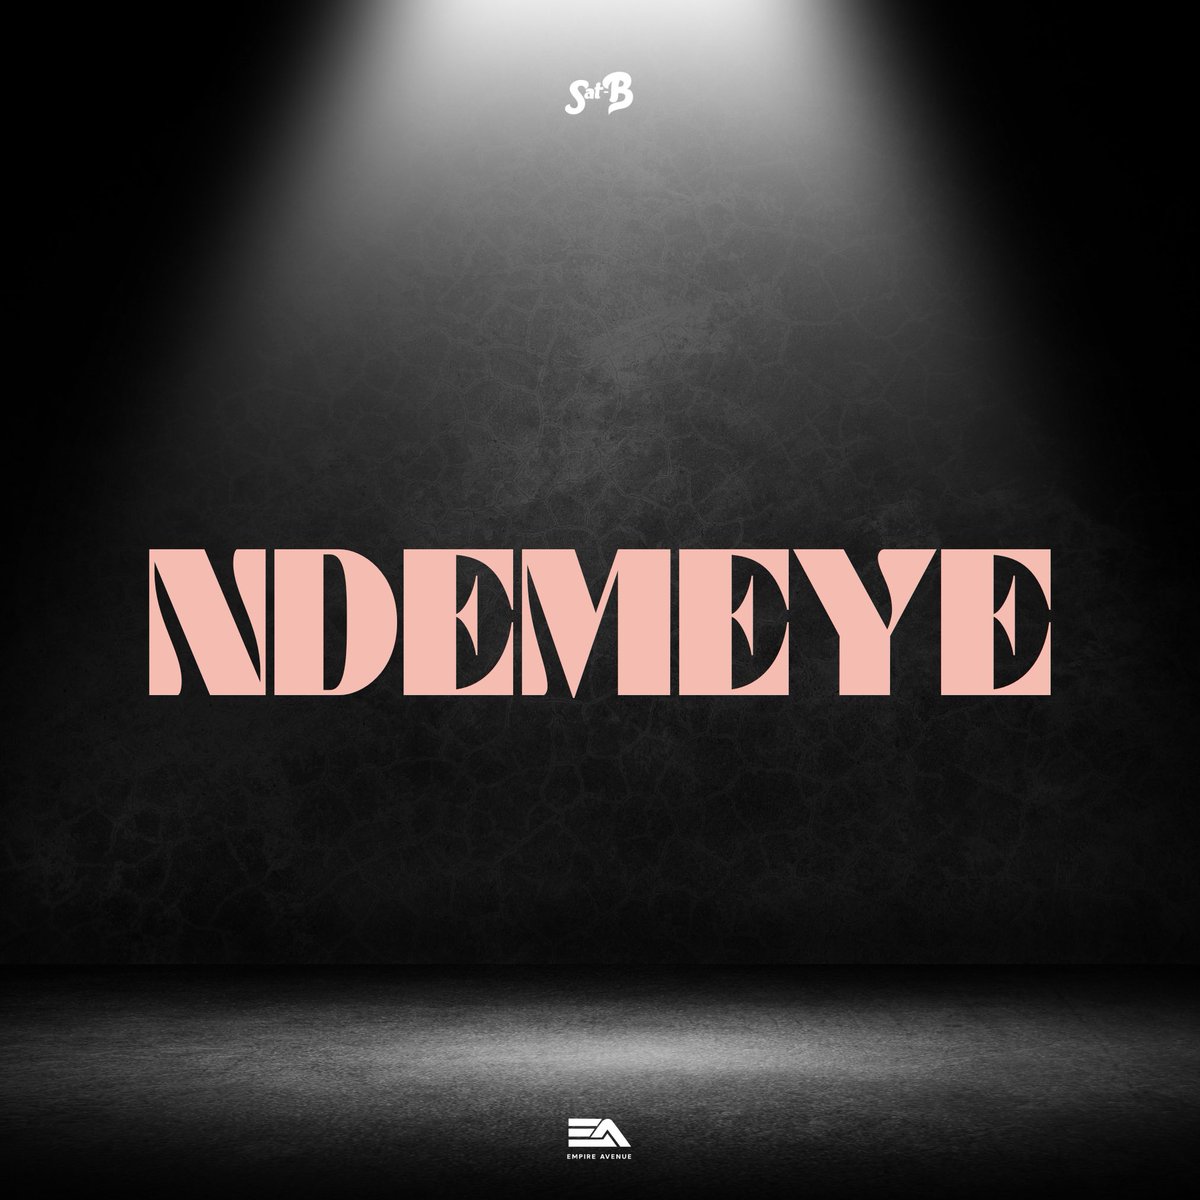 We’re thrilled to announce that the title of our upcoming musical gem is ‘Ndemeye’. Stay tuned for more updates as we embark on this enchanting journey together. #Ndemeye